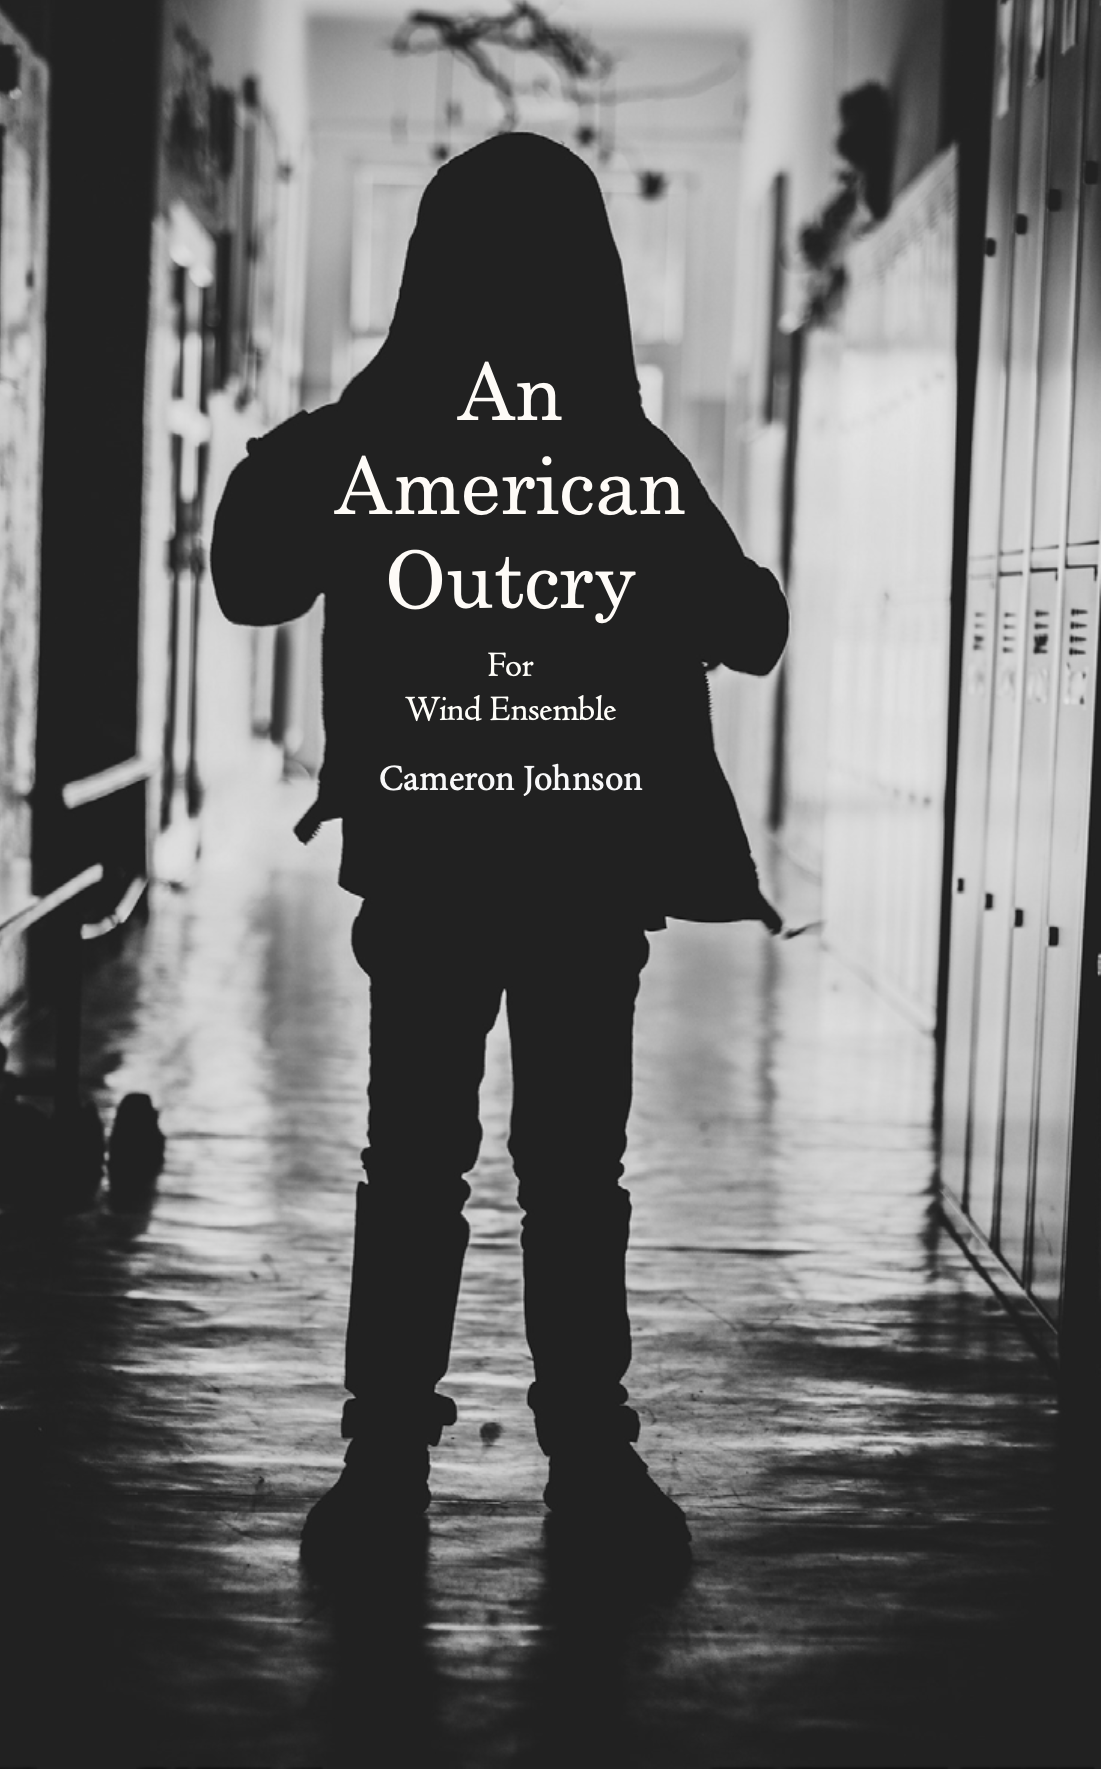 An American Outcry (Score Only) by Cameron Johnson